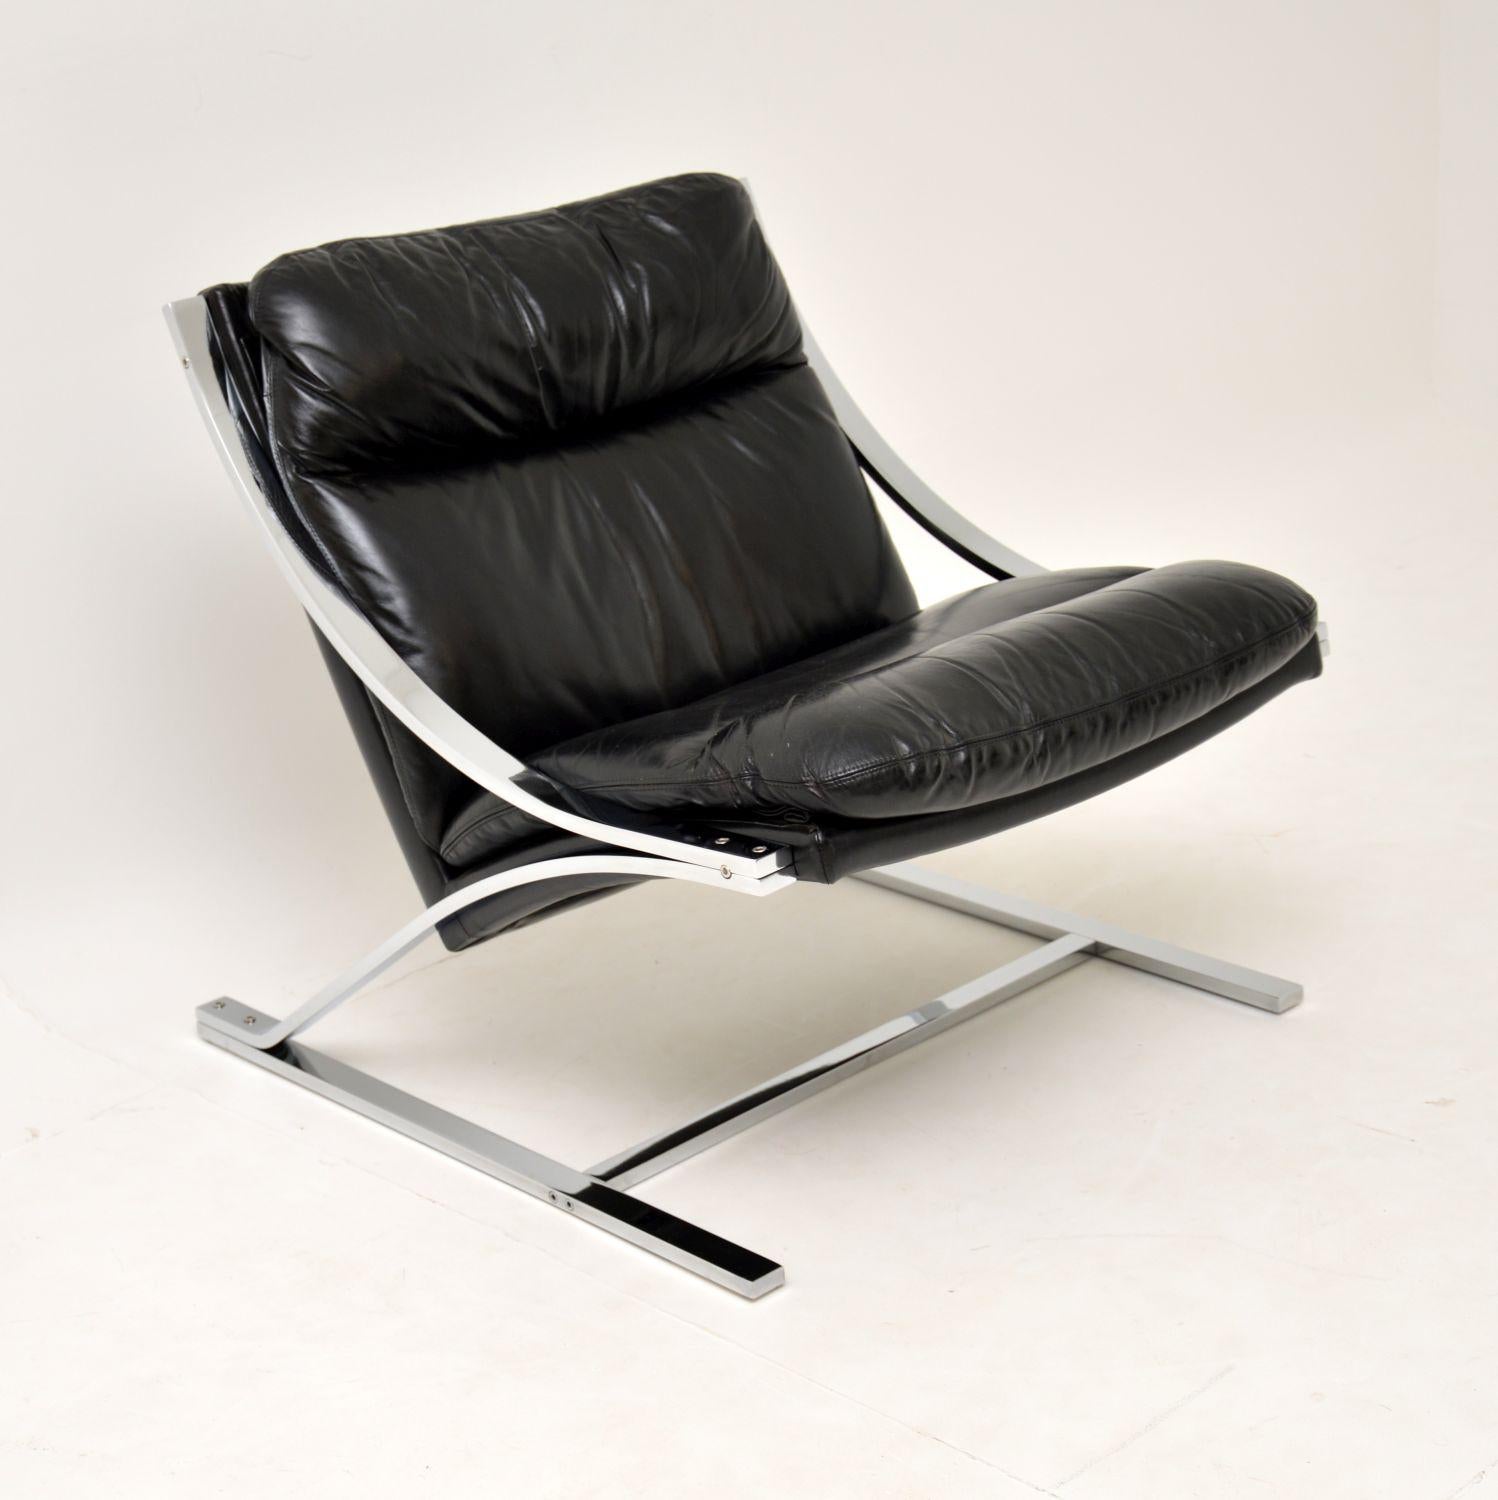 Swiss 1960’s Vintage Leather & Chrome Zeta Chair by Paul Tuttle for Strassle